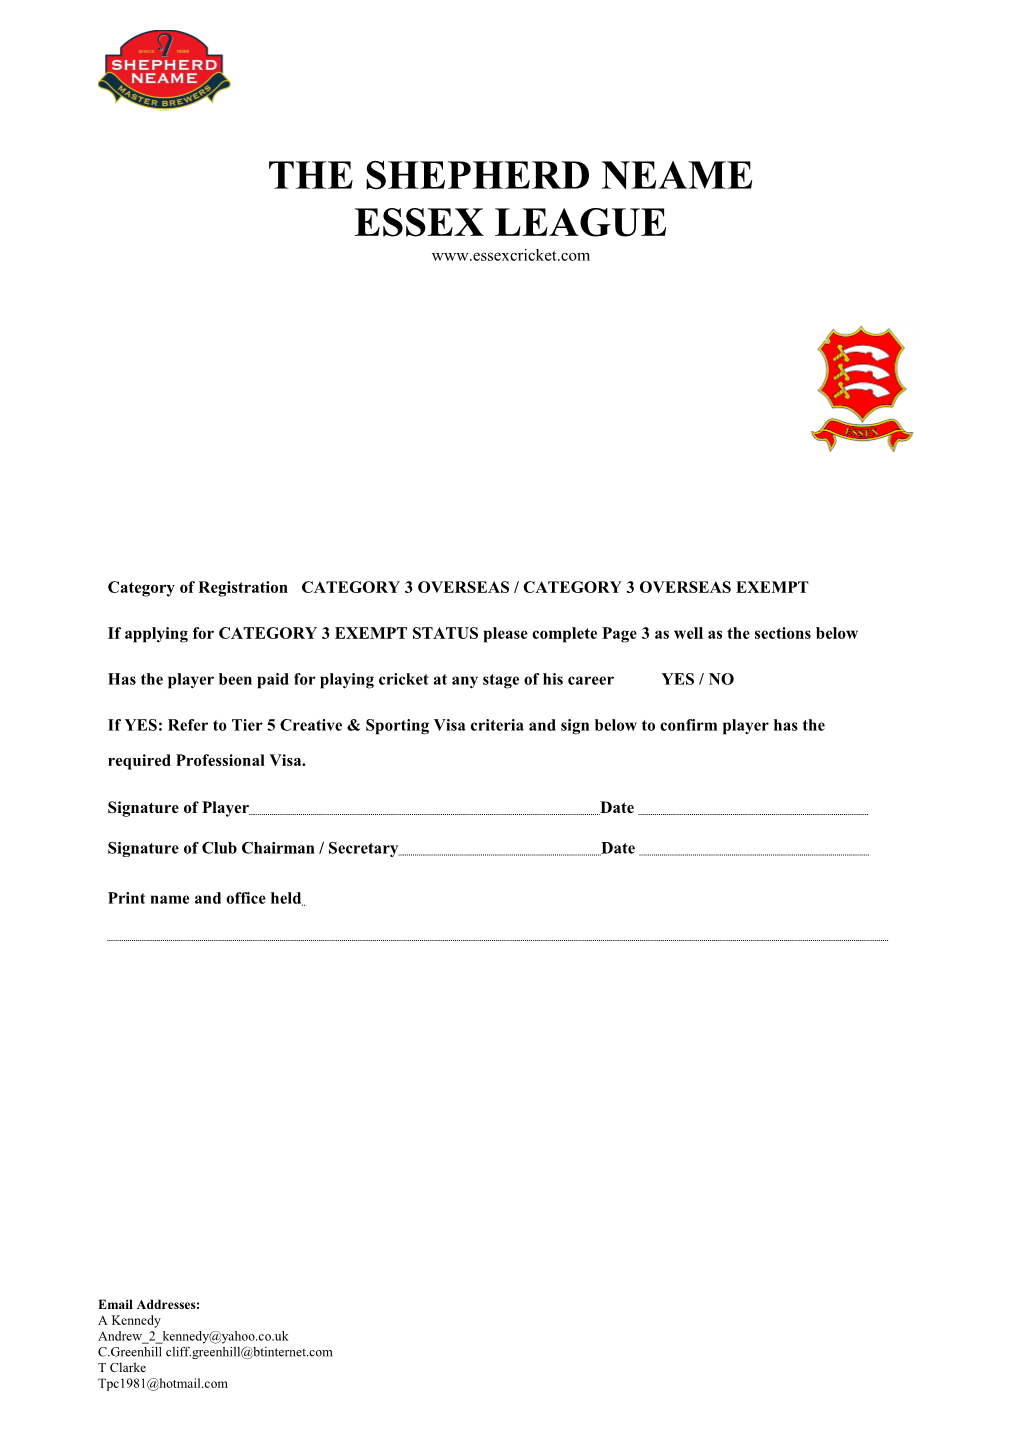 ECB Accredited Premier Cricket League - Overseas Player Registration Form